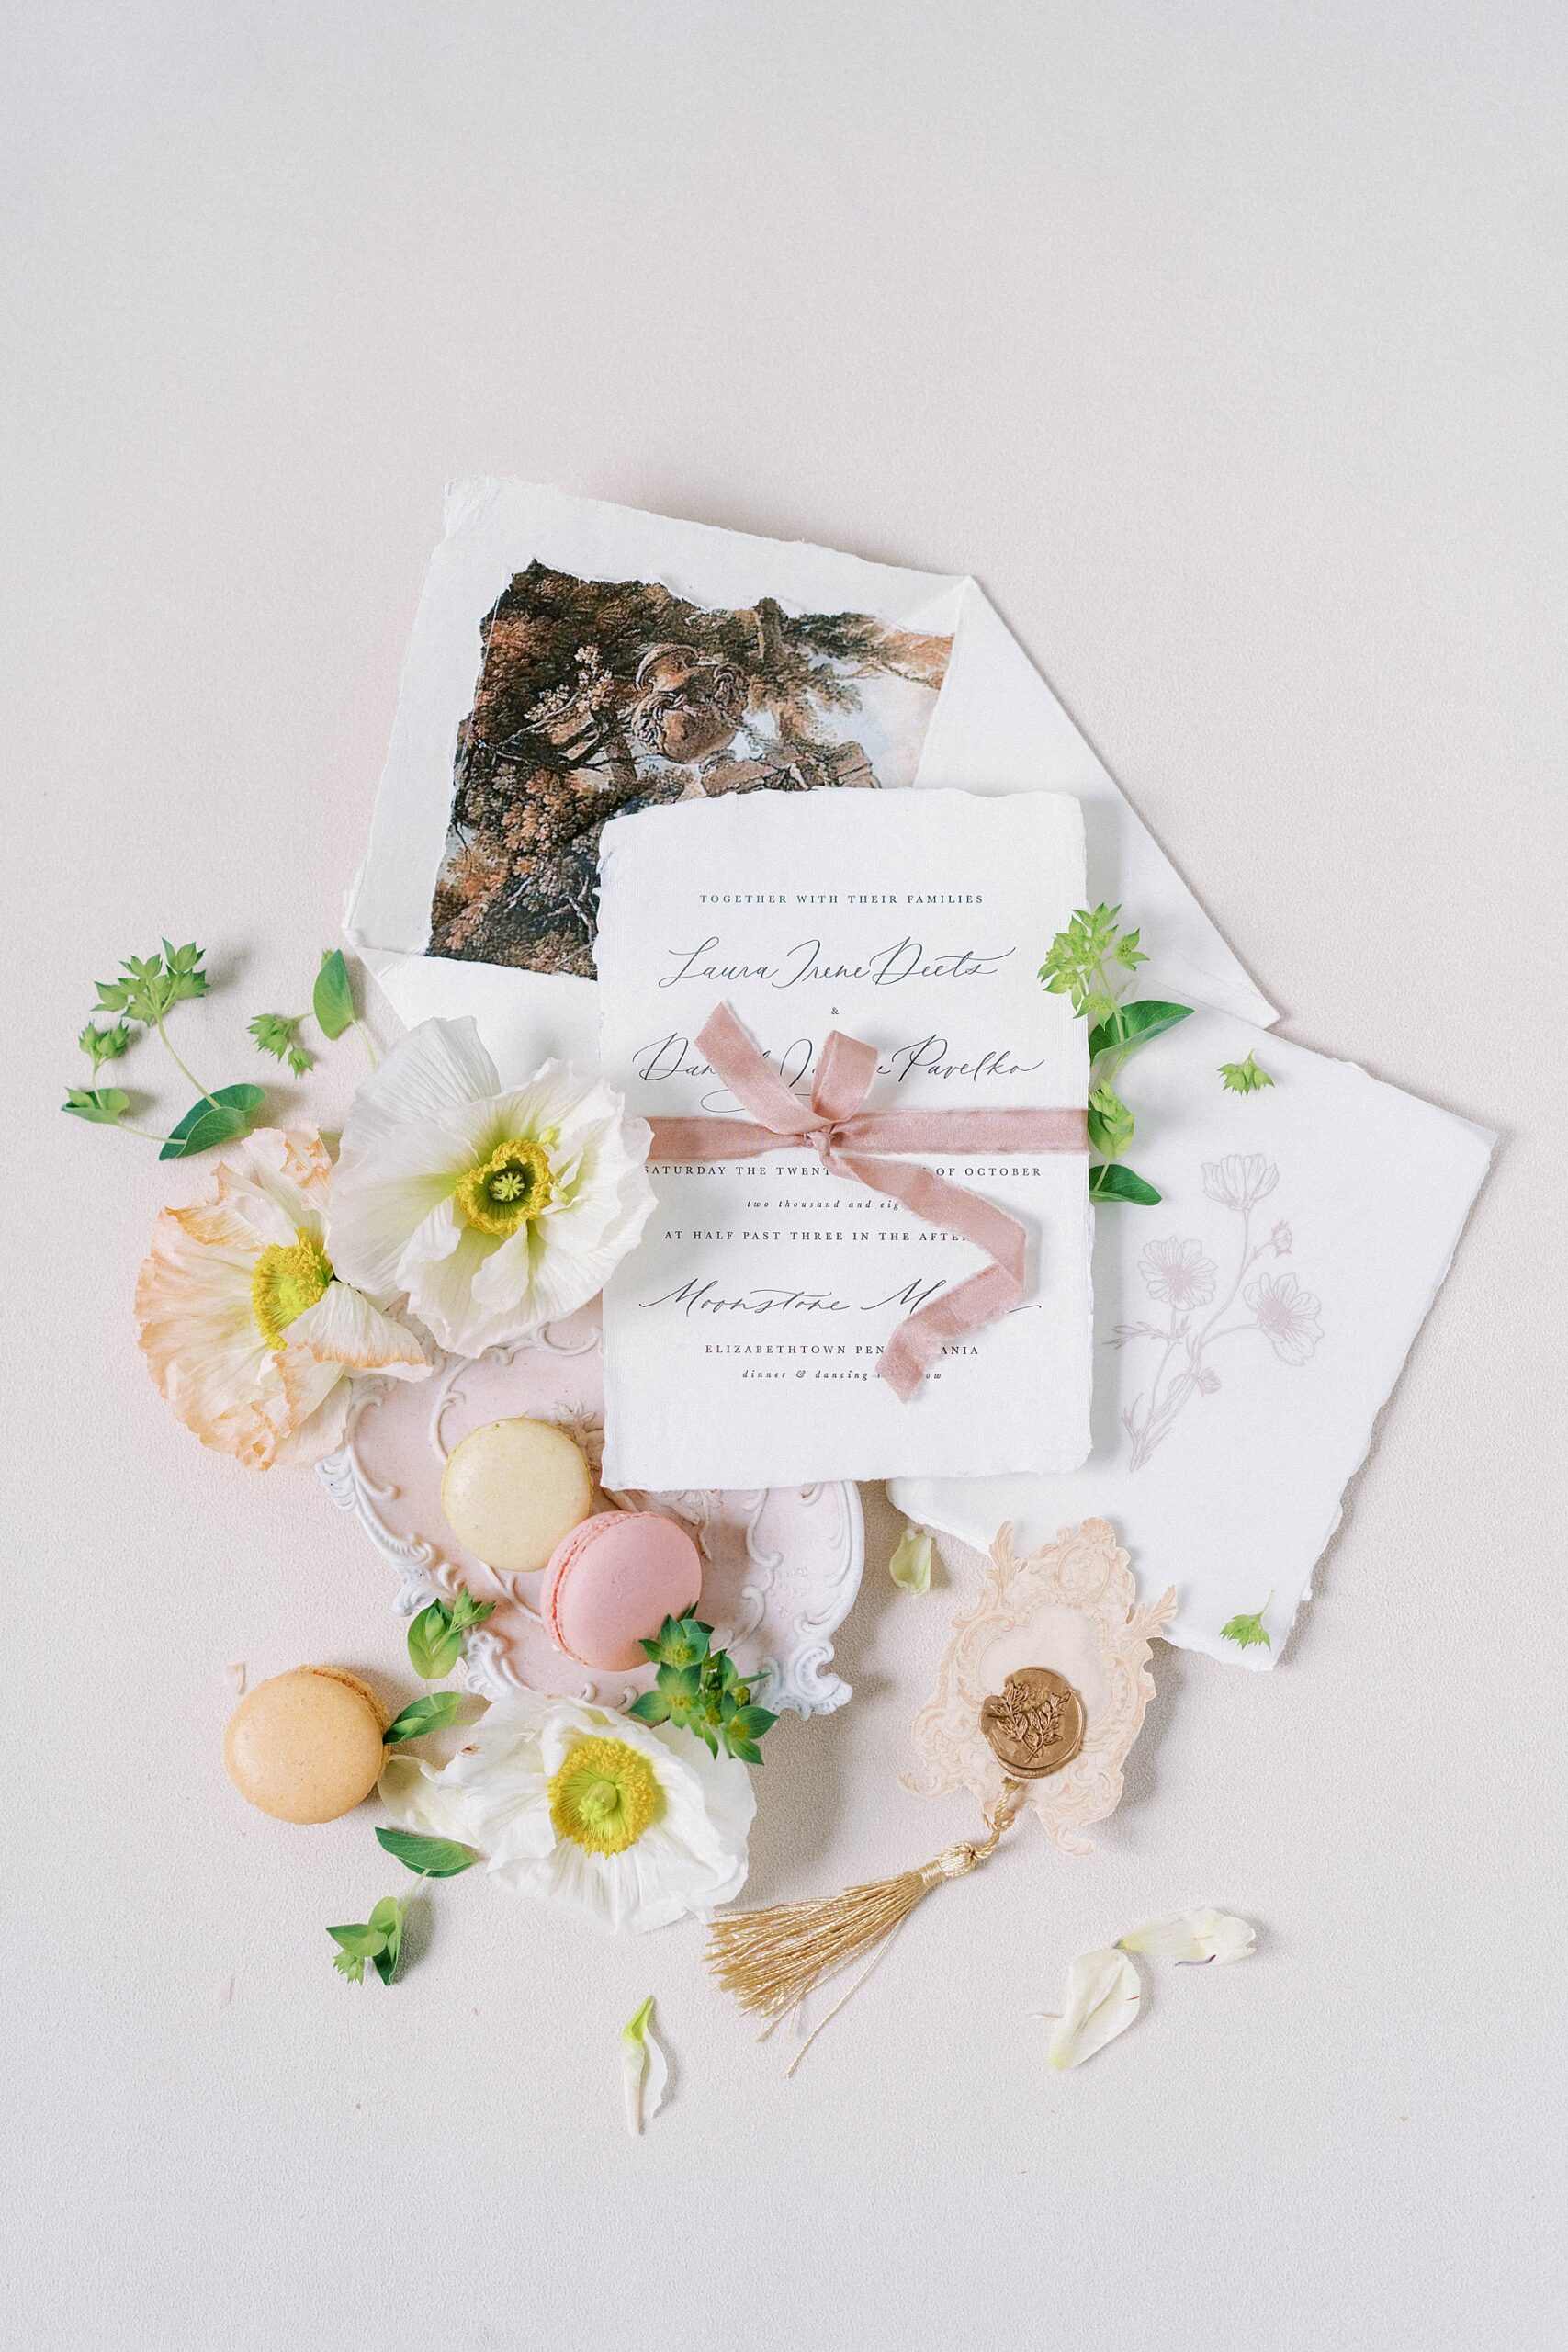 wedding invites and details